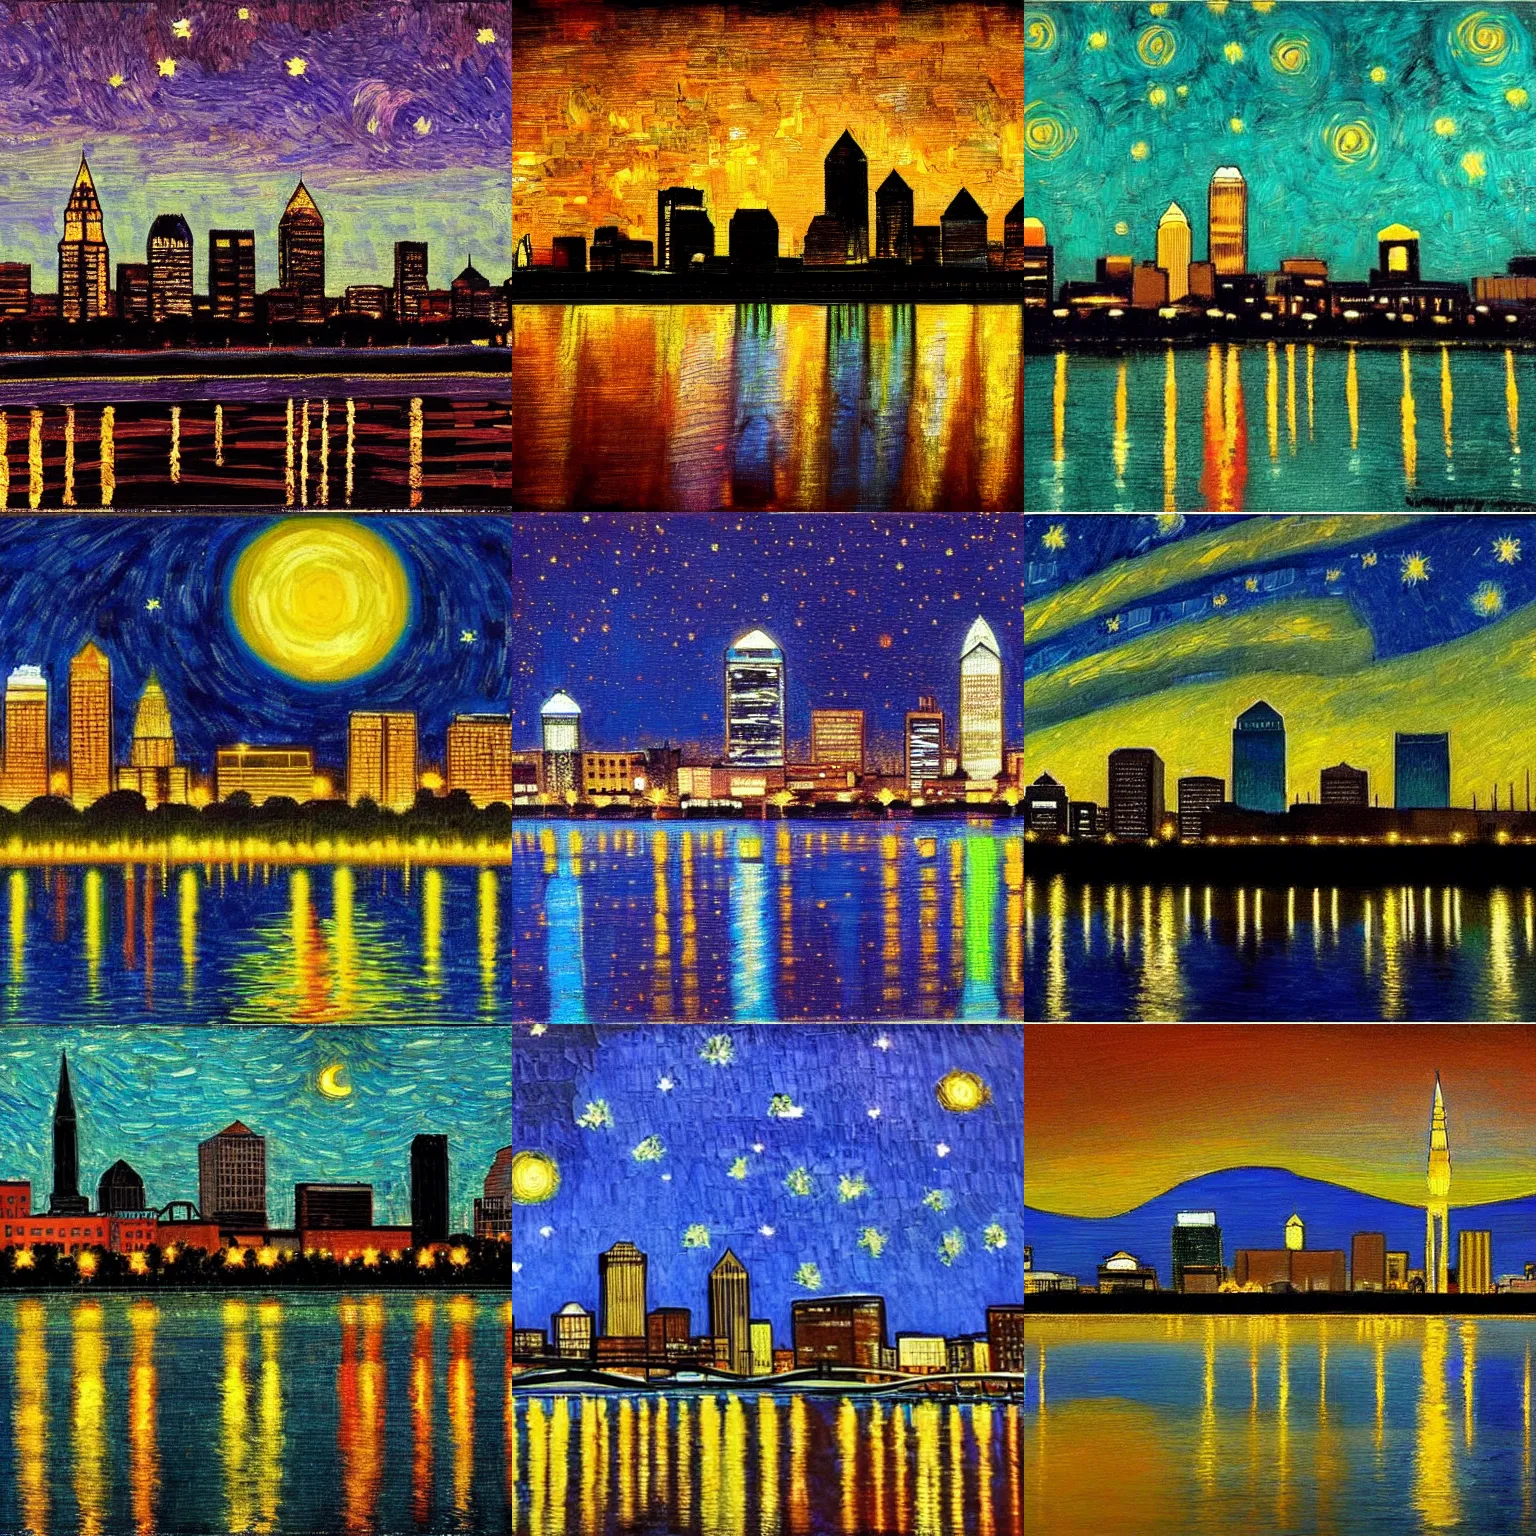 Prompt: louisville ky skyline at night reflecting off the river, in the style of van goghs painting starry night